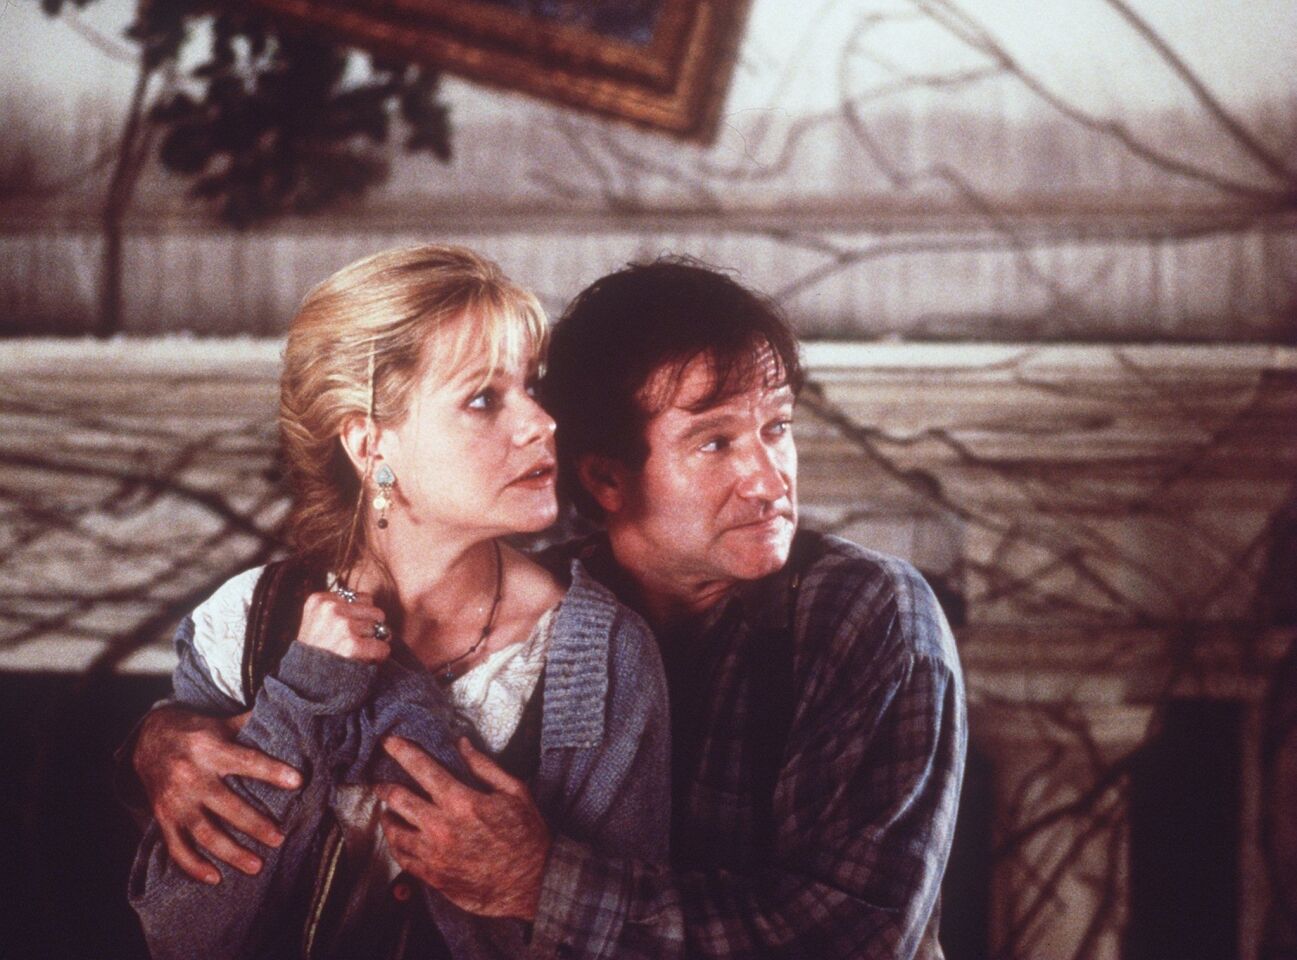 Robin Williams plays Alan Parrish, a man who was trapped in a board game for 26 years in 1995's "Jumanji." He costarred with Bonnie Hunt.